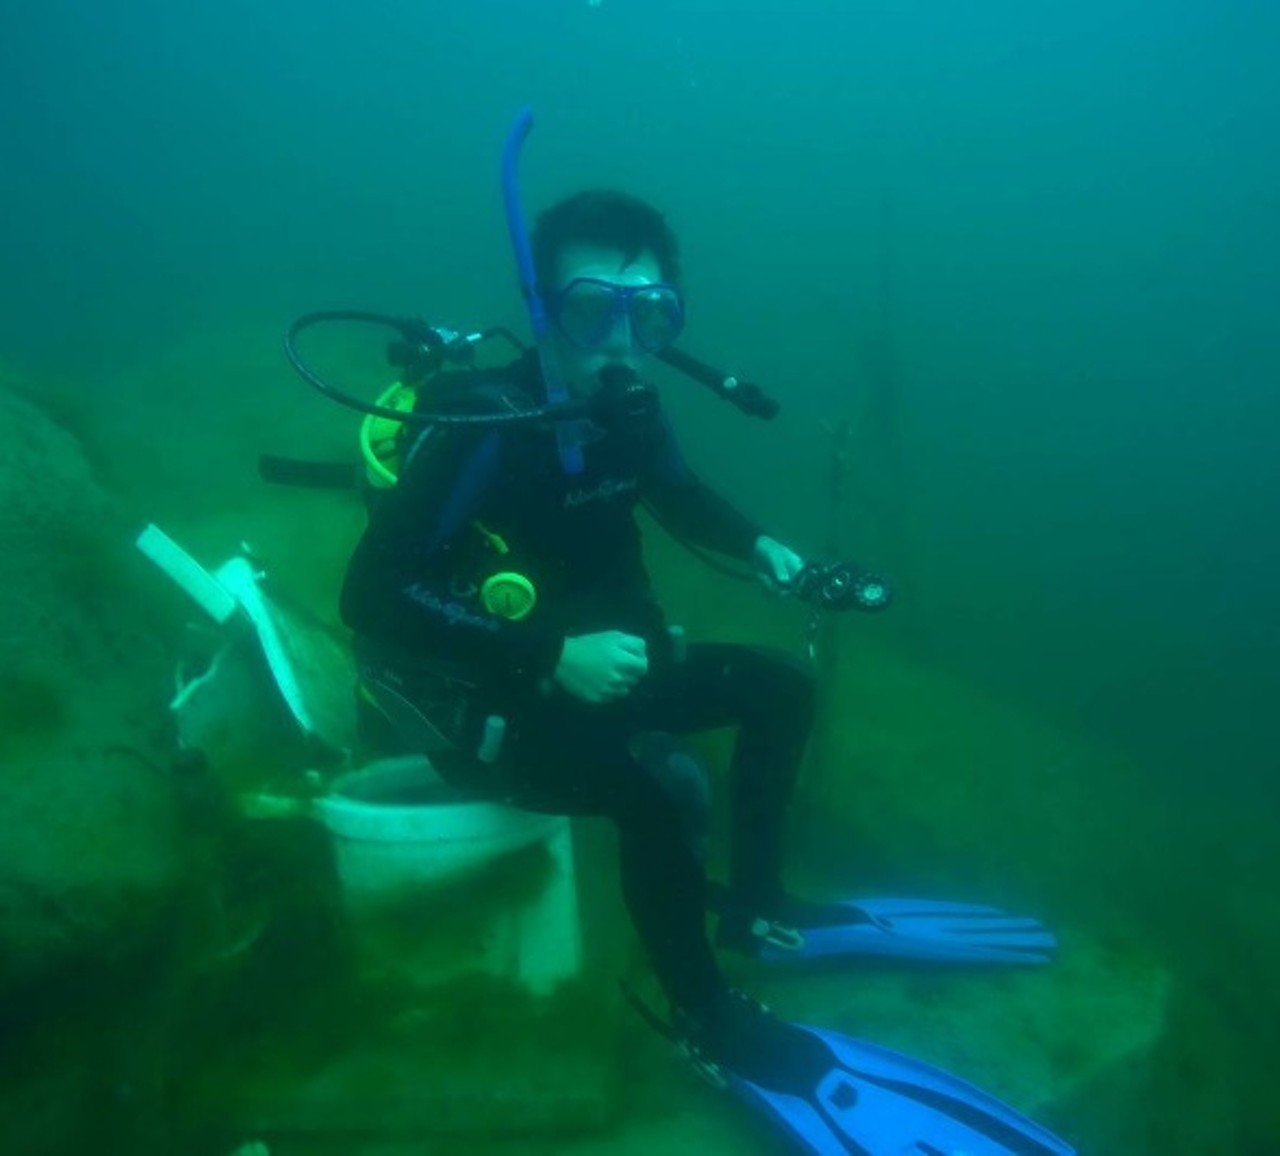  White Star Quarry
901 S. Main St., Gibsonburg, 419-637-DIVE
Known for its scuba diving as well as its relaxing swimming beach, some might even say White Star Quarry is the shit. 
Photo via kevinhockey01/Instagram